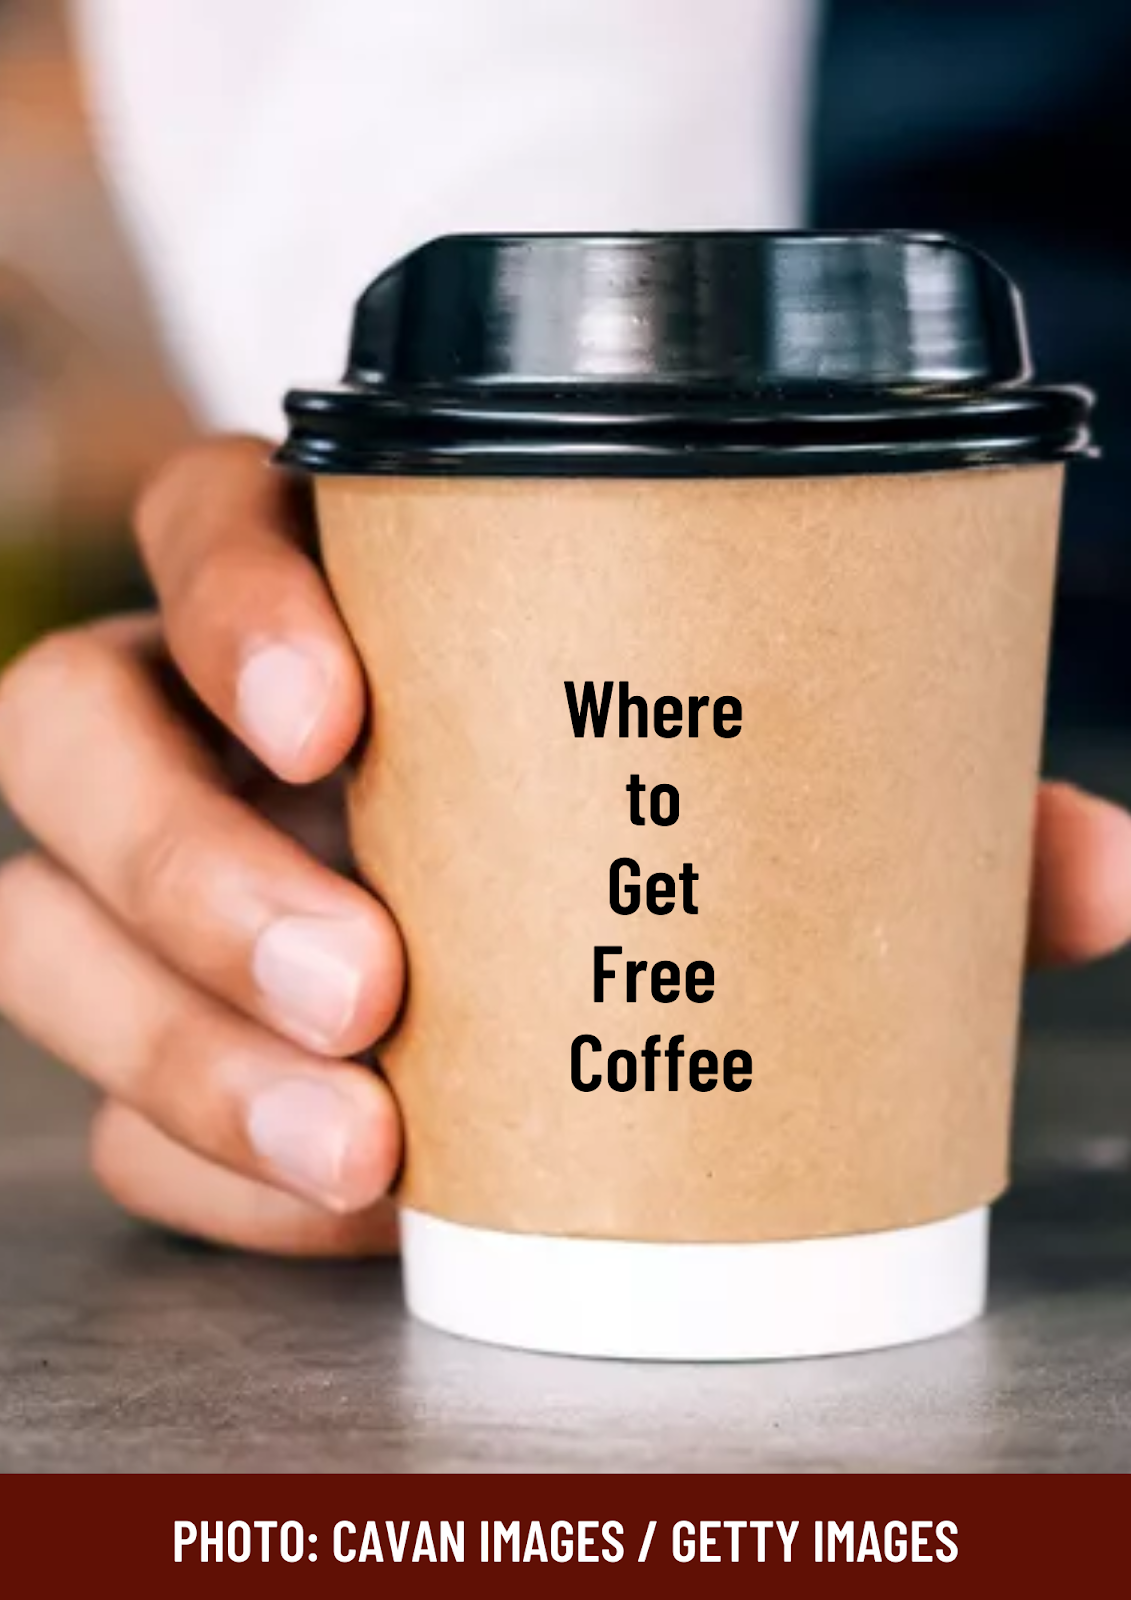 Try free coffee